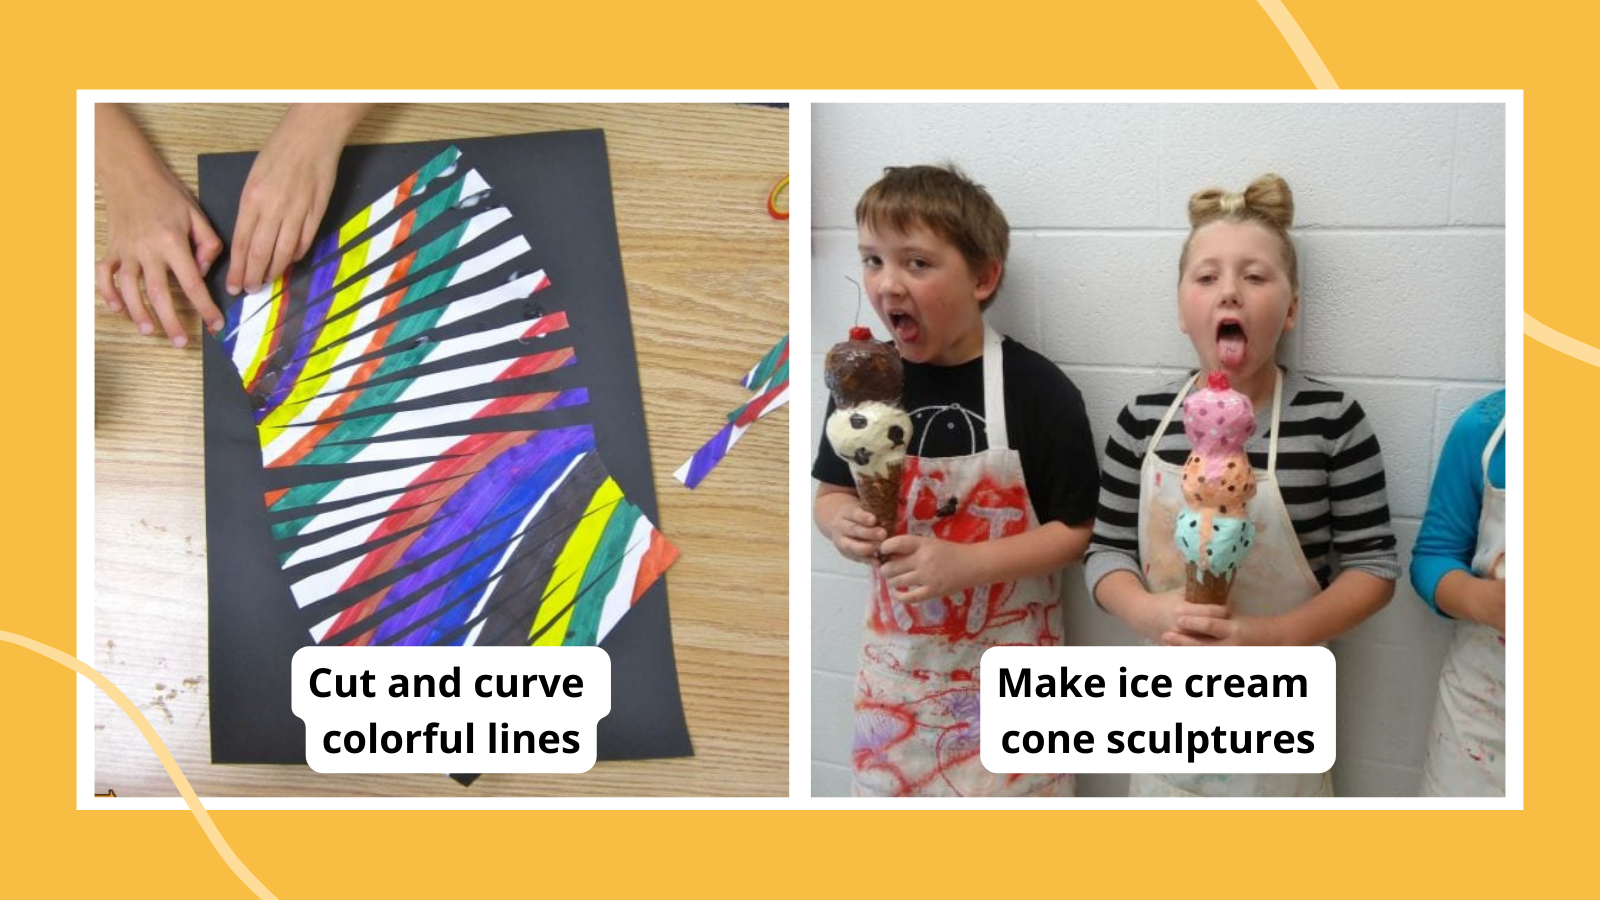 Examples of the best third grade art projects including folding and curving colorful lines and two kids wearing aprons pretending to eat paper mache ice cream cones.